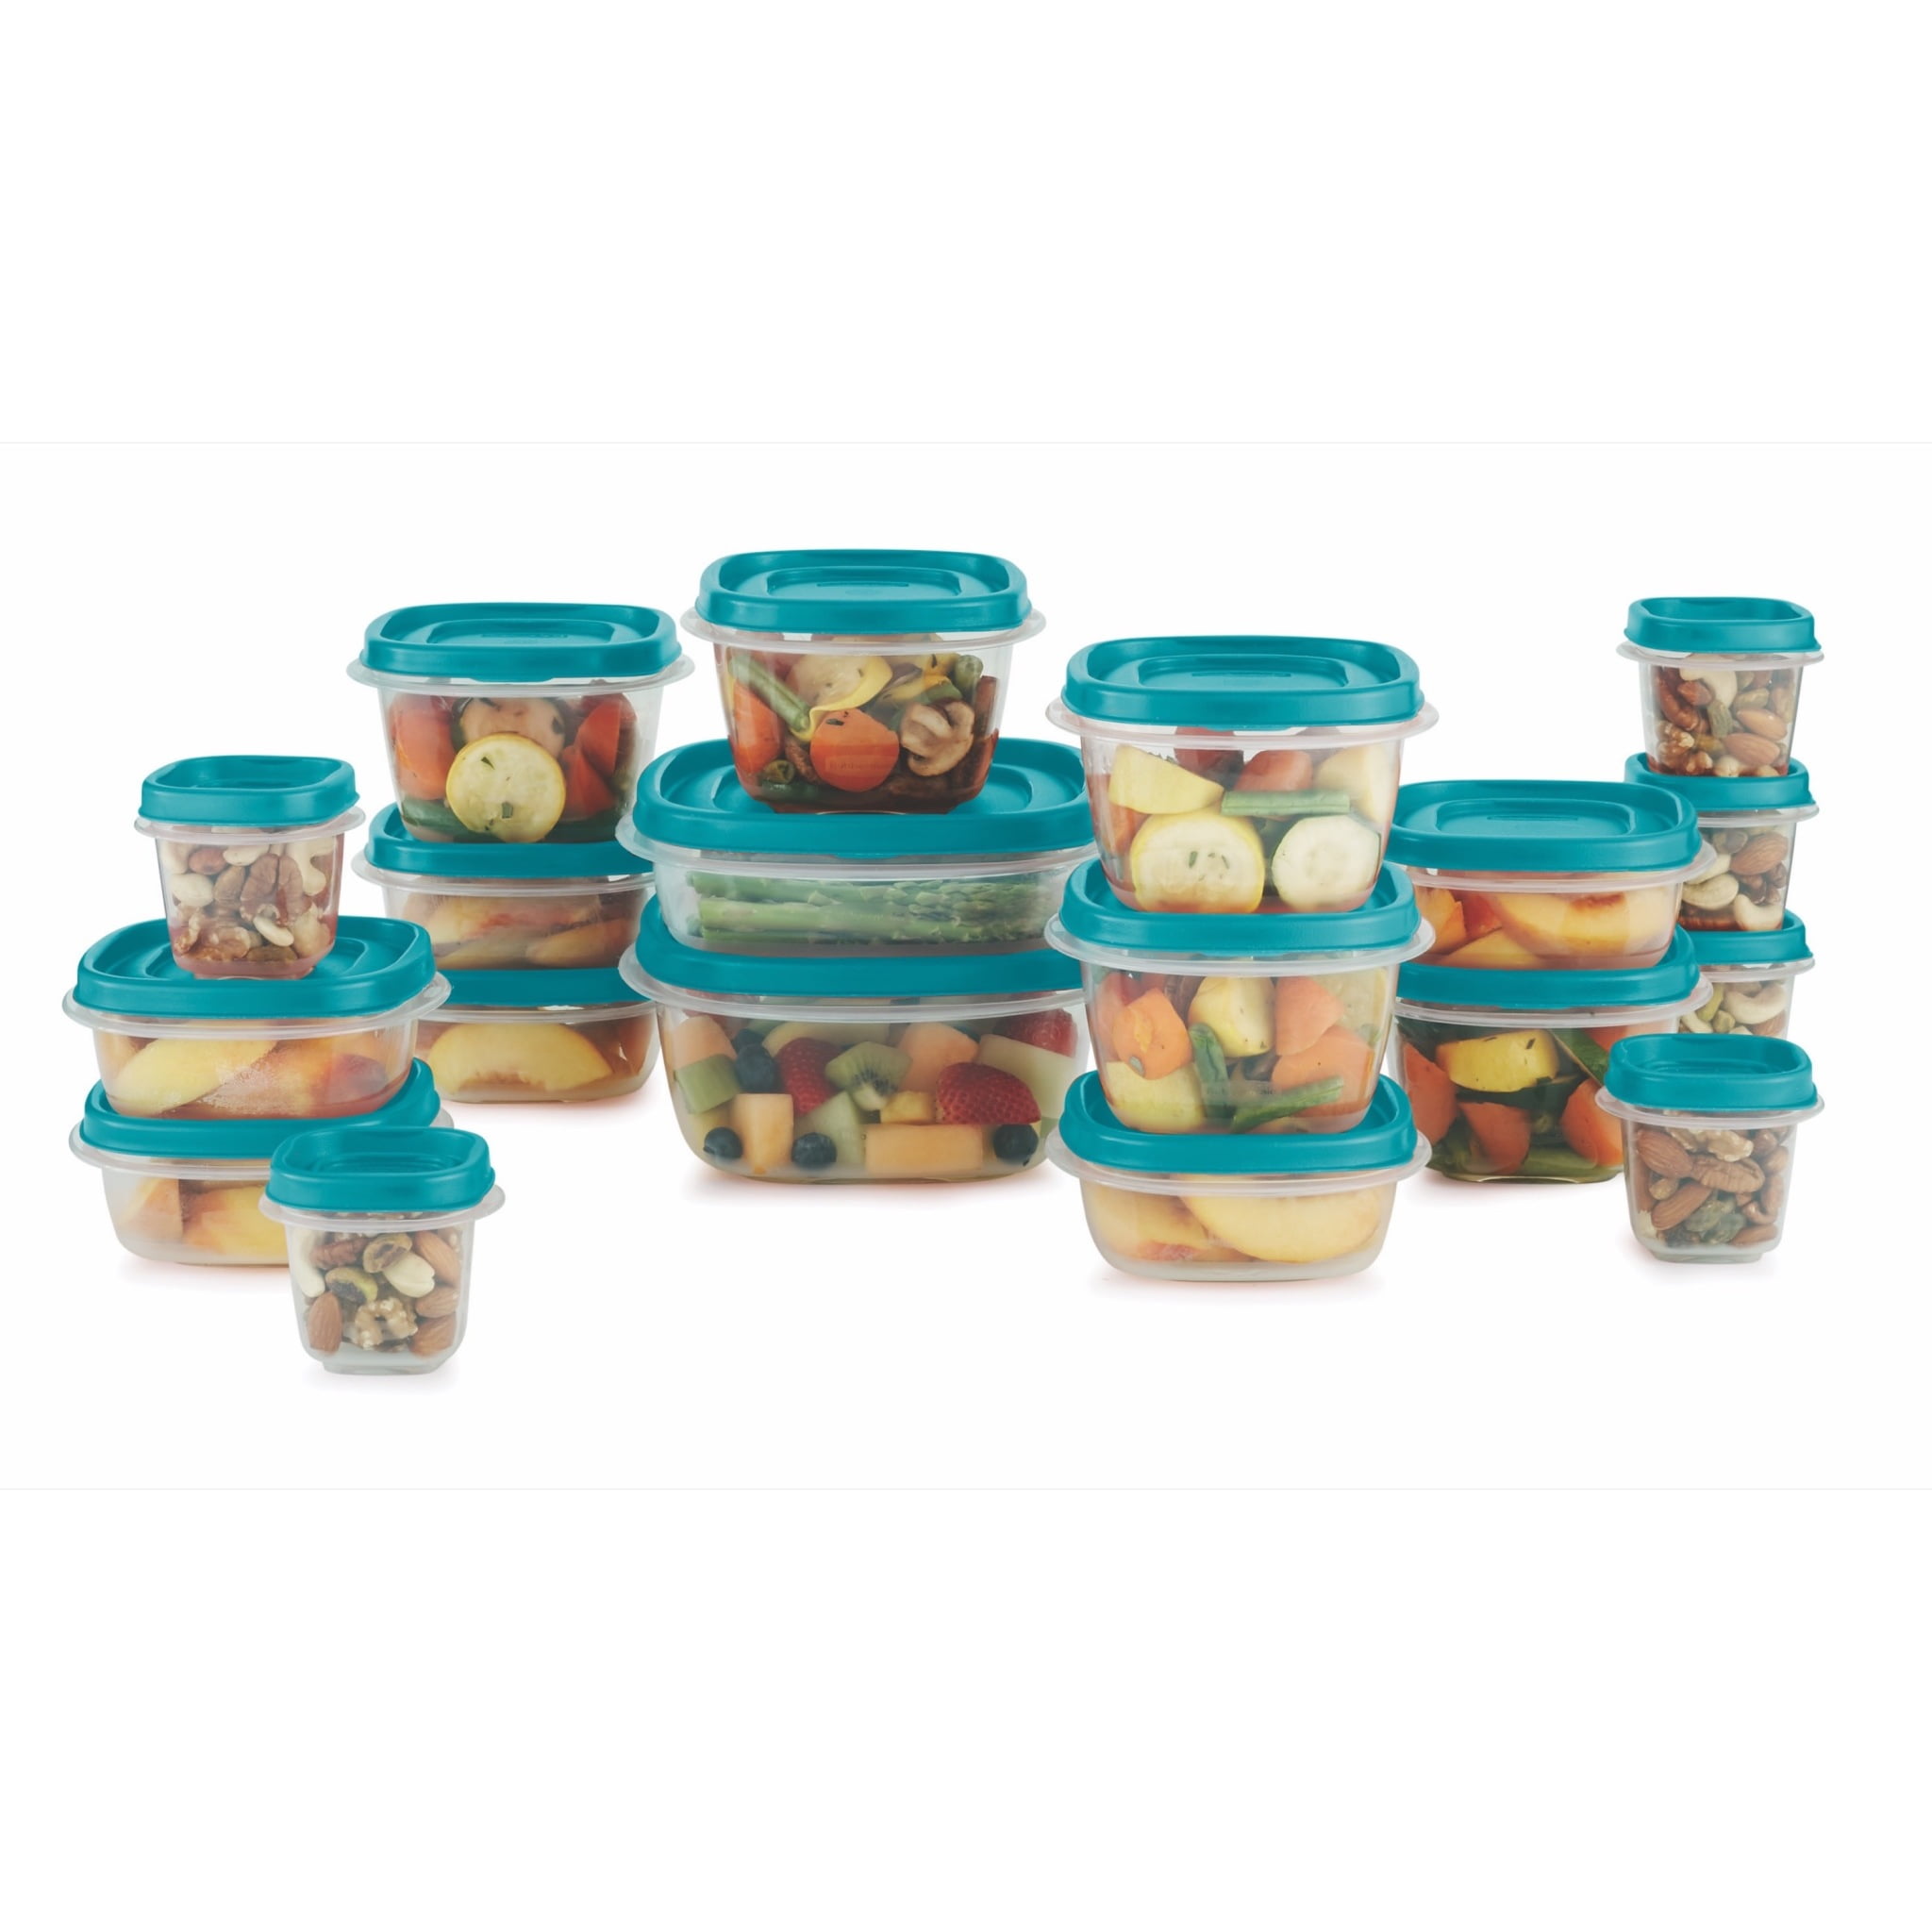 Rubbermaid 608866902584 Easy Find Lids Square 3-Cup Food Storage Conta –  SHANULKA Home Decor